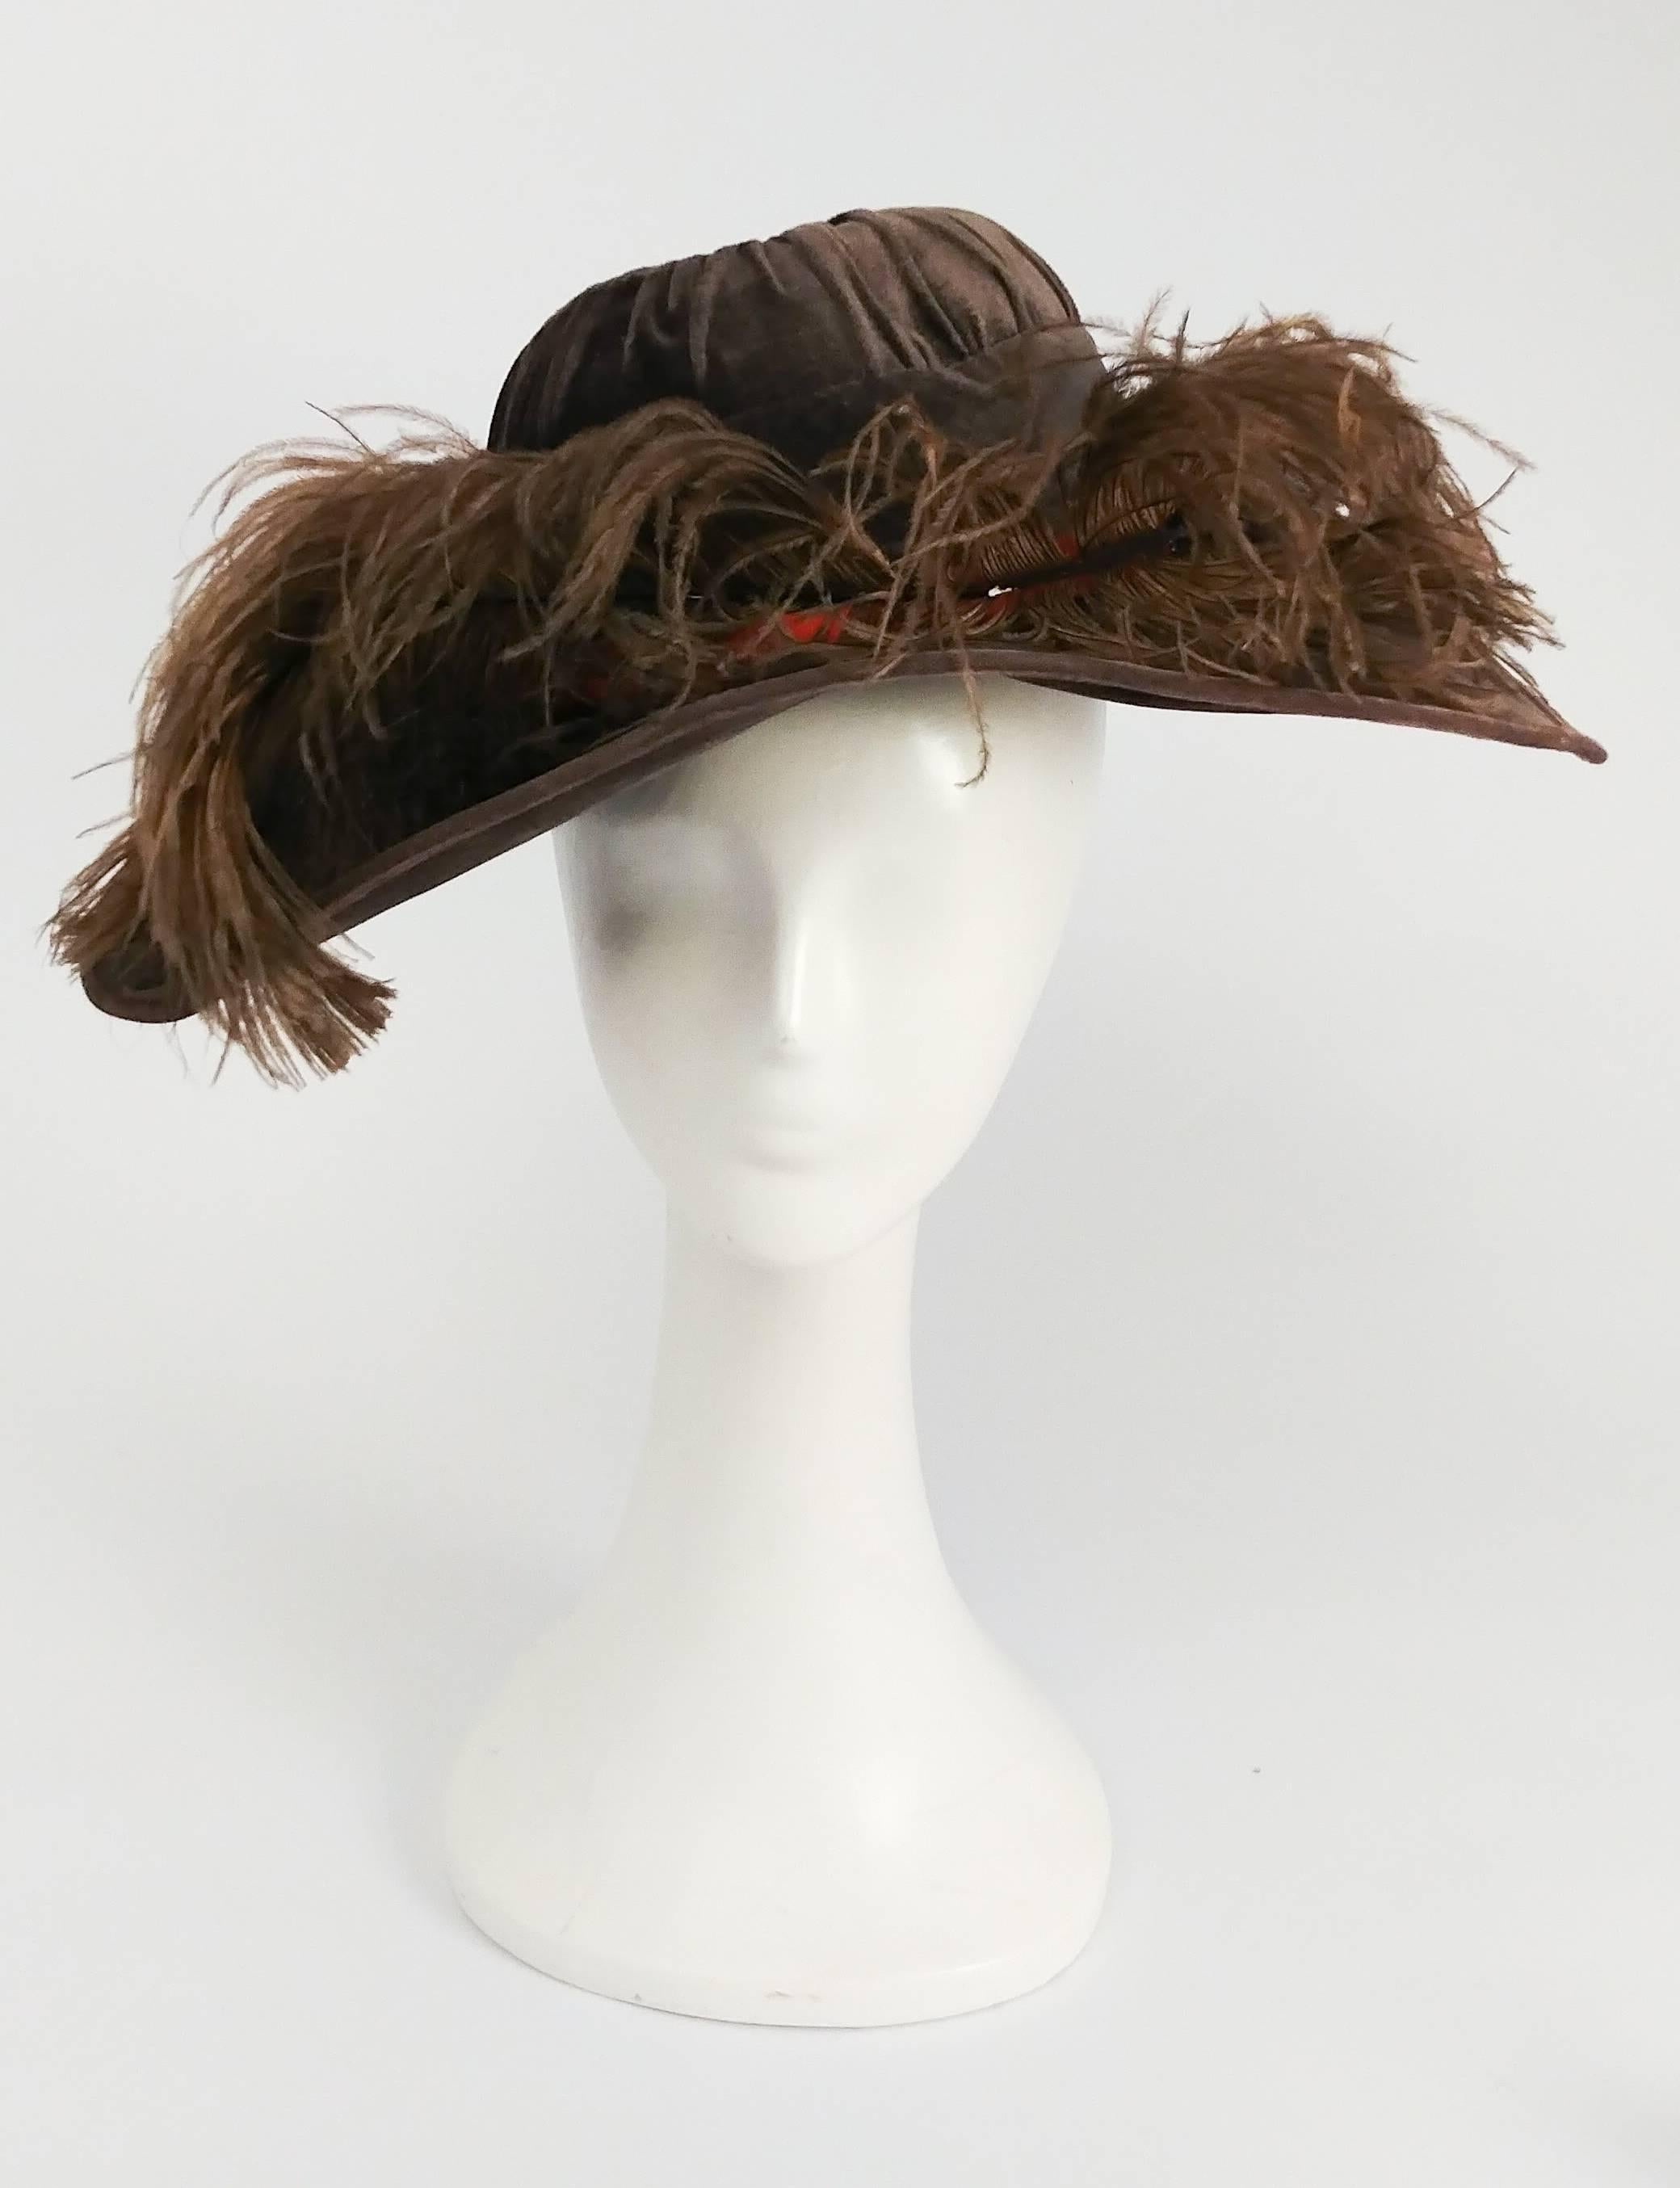 Edwardian Taupe Picture Hat w/ Feather Trim. Wide brimmed fur velvet hat, all-over feather trim on a contrast orange hat band. Crown of hat is gathered. Lined in silk, slight press on underside of hat shown in photo. 